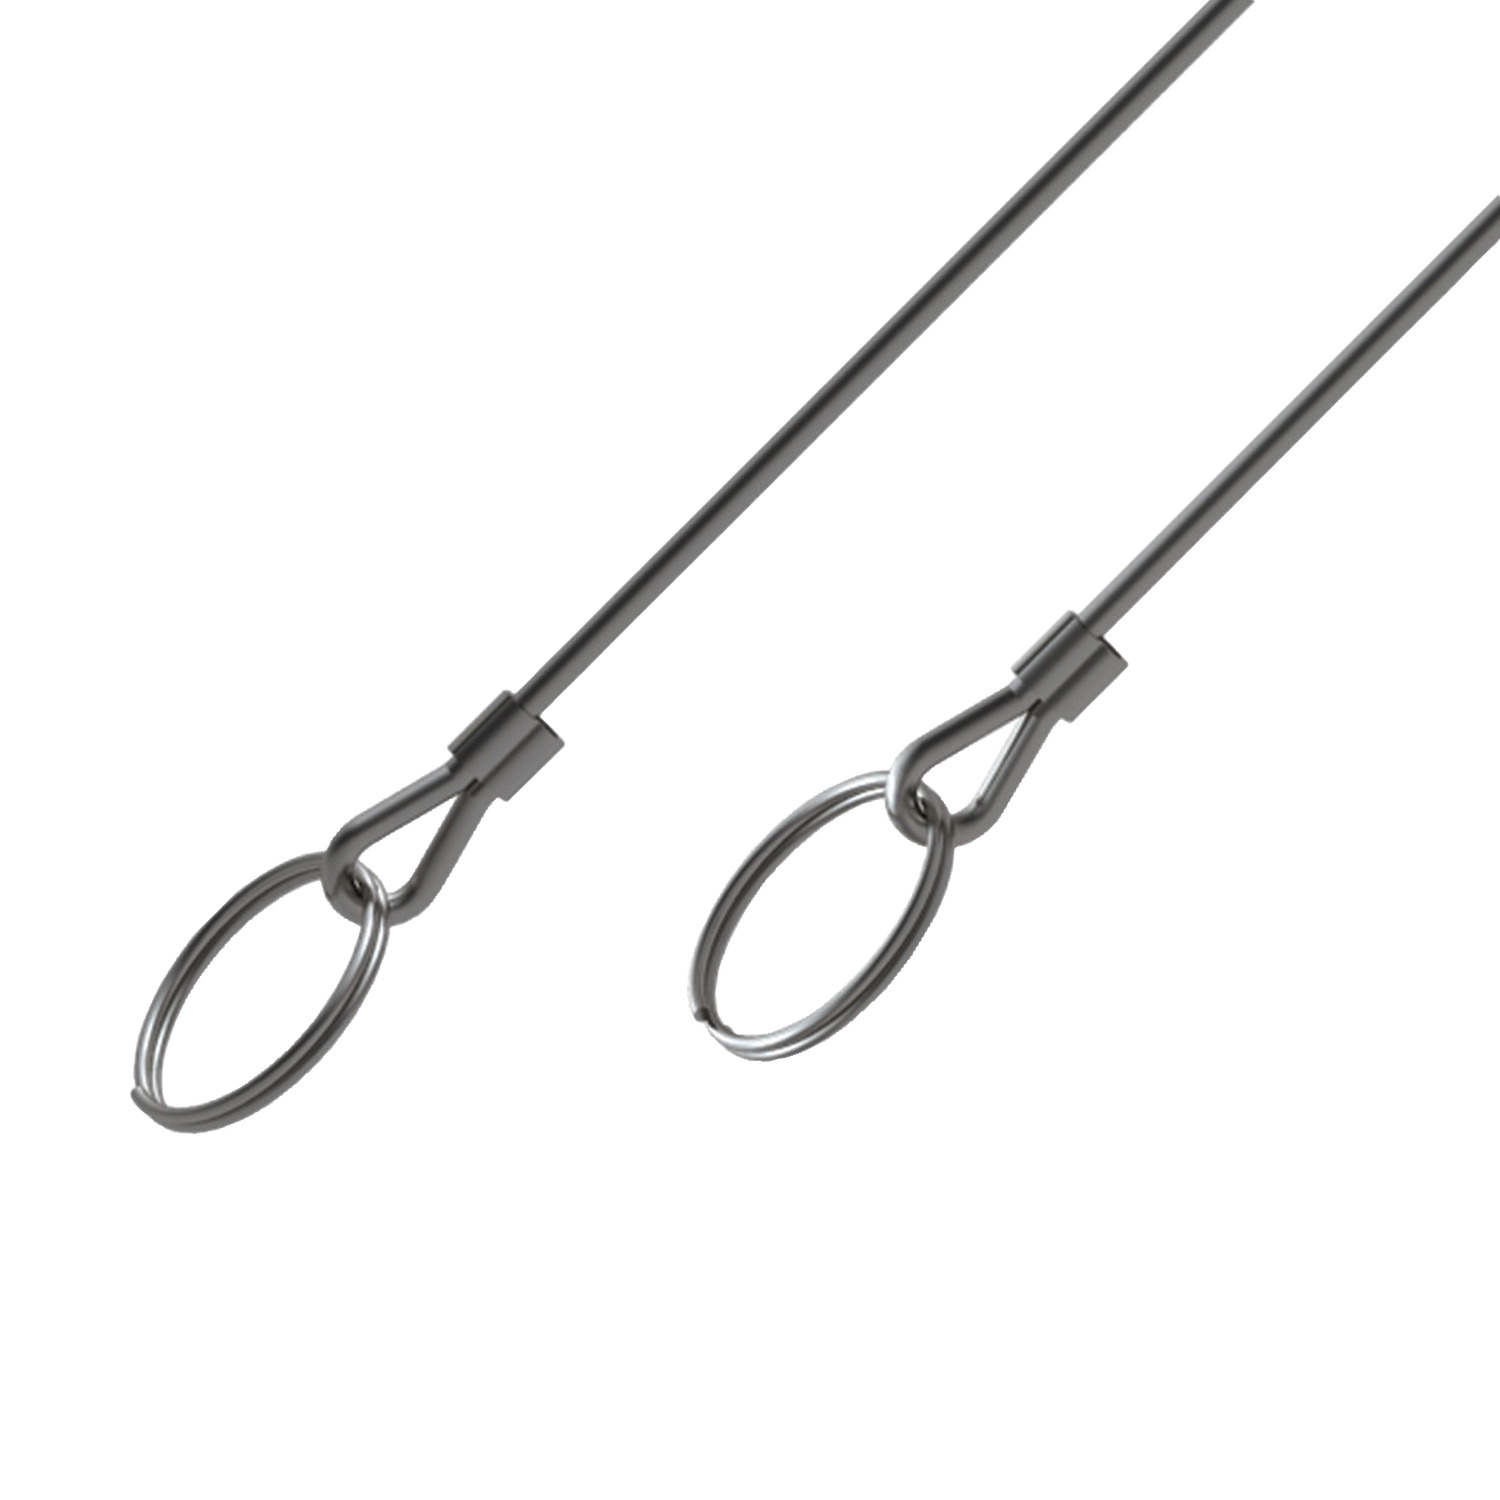 Lanyard - Loop to Loop Loop to loop style lanyard with split rings. Crimps are made from stainless steel and are suitable up to 28Kgf. For use with our range of quick release pins.